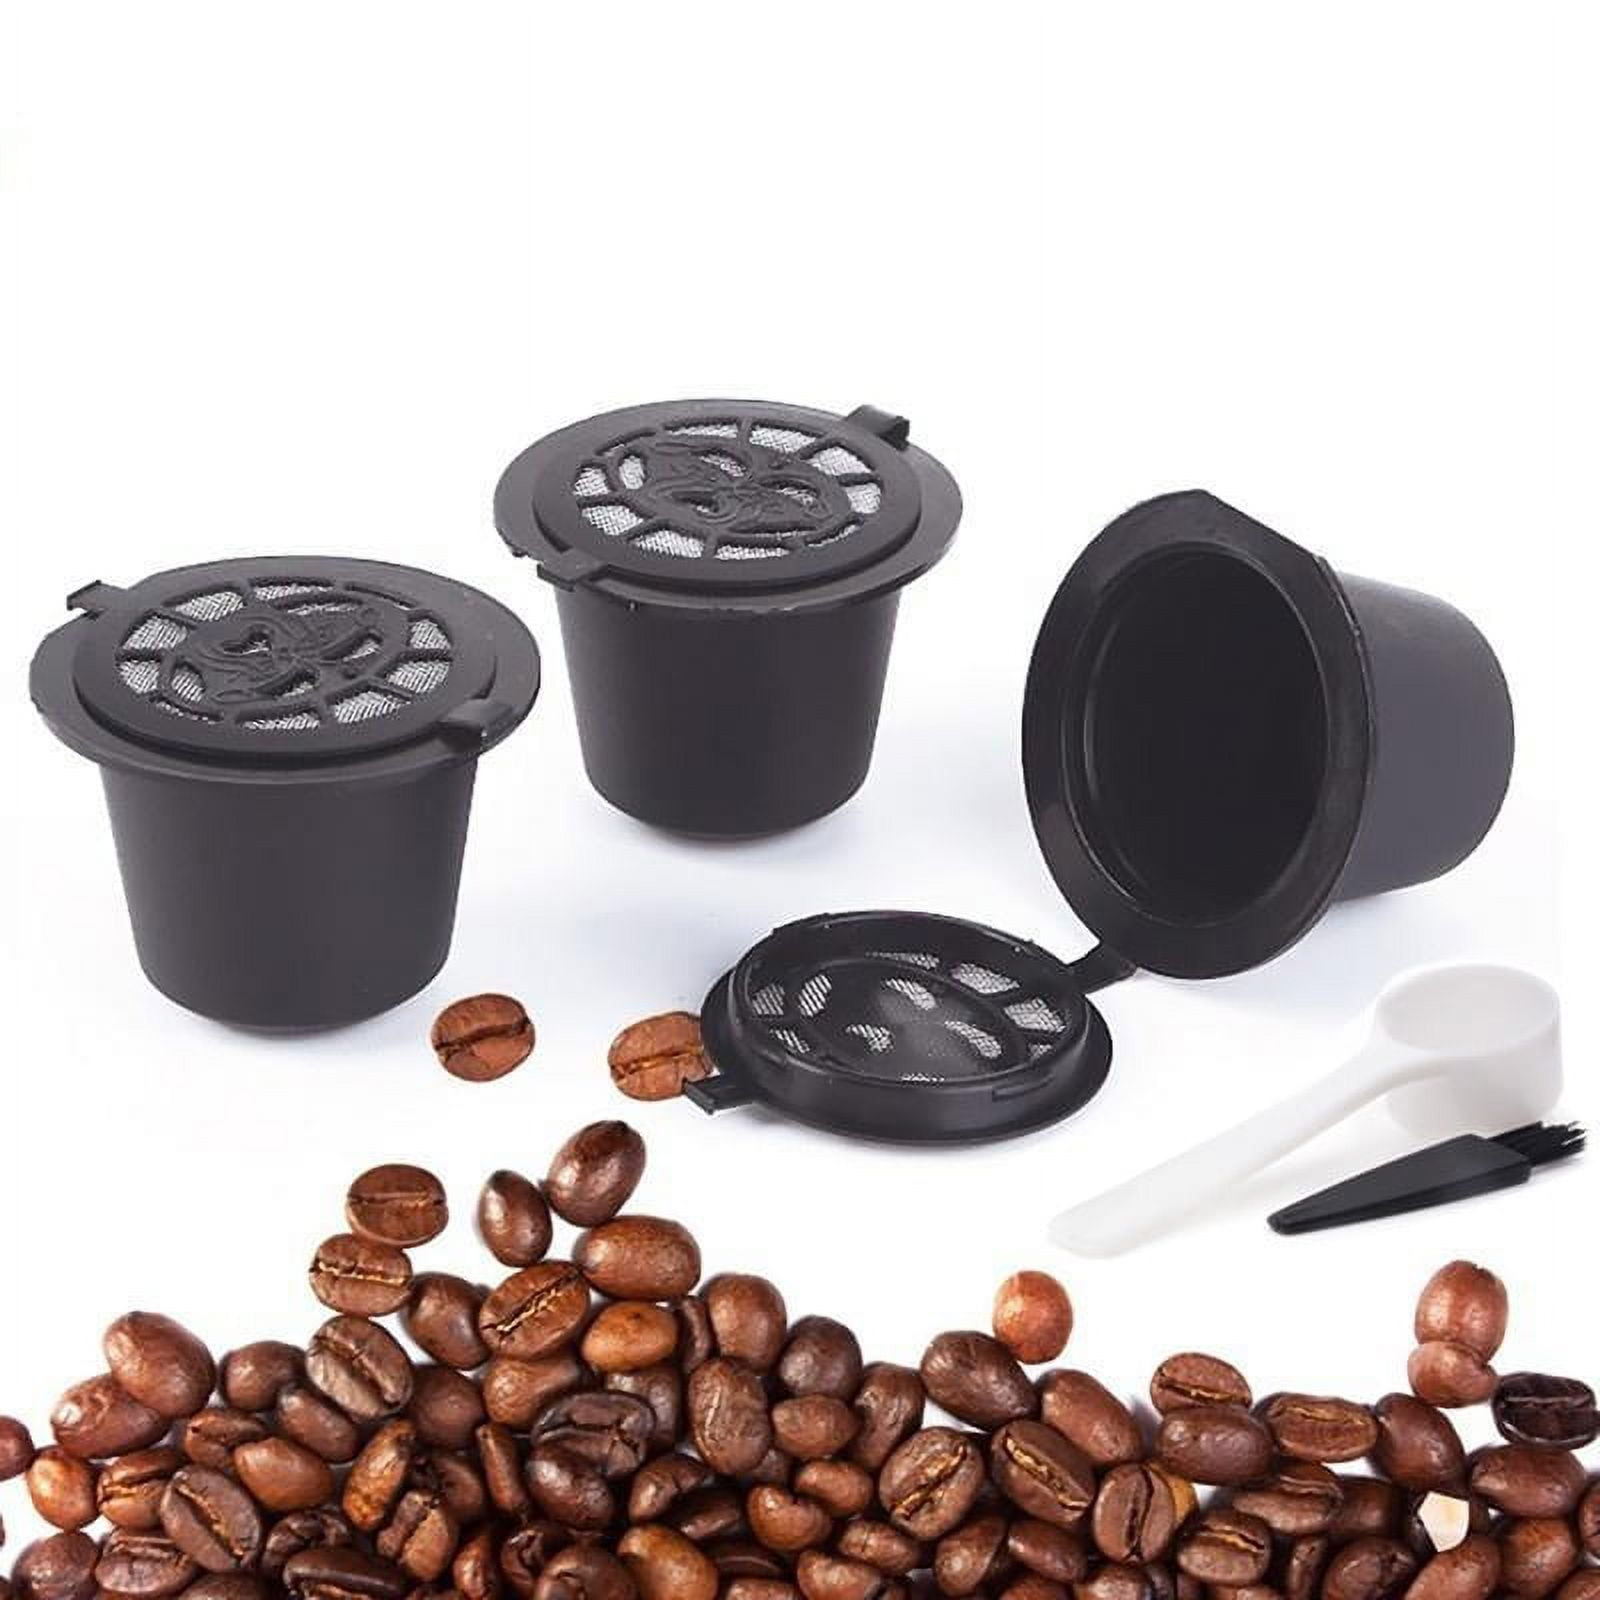 Nespresso Vertuo Reusable Capsules Review, Geesta Foil Lid Kit